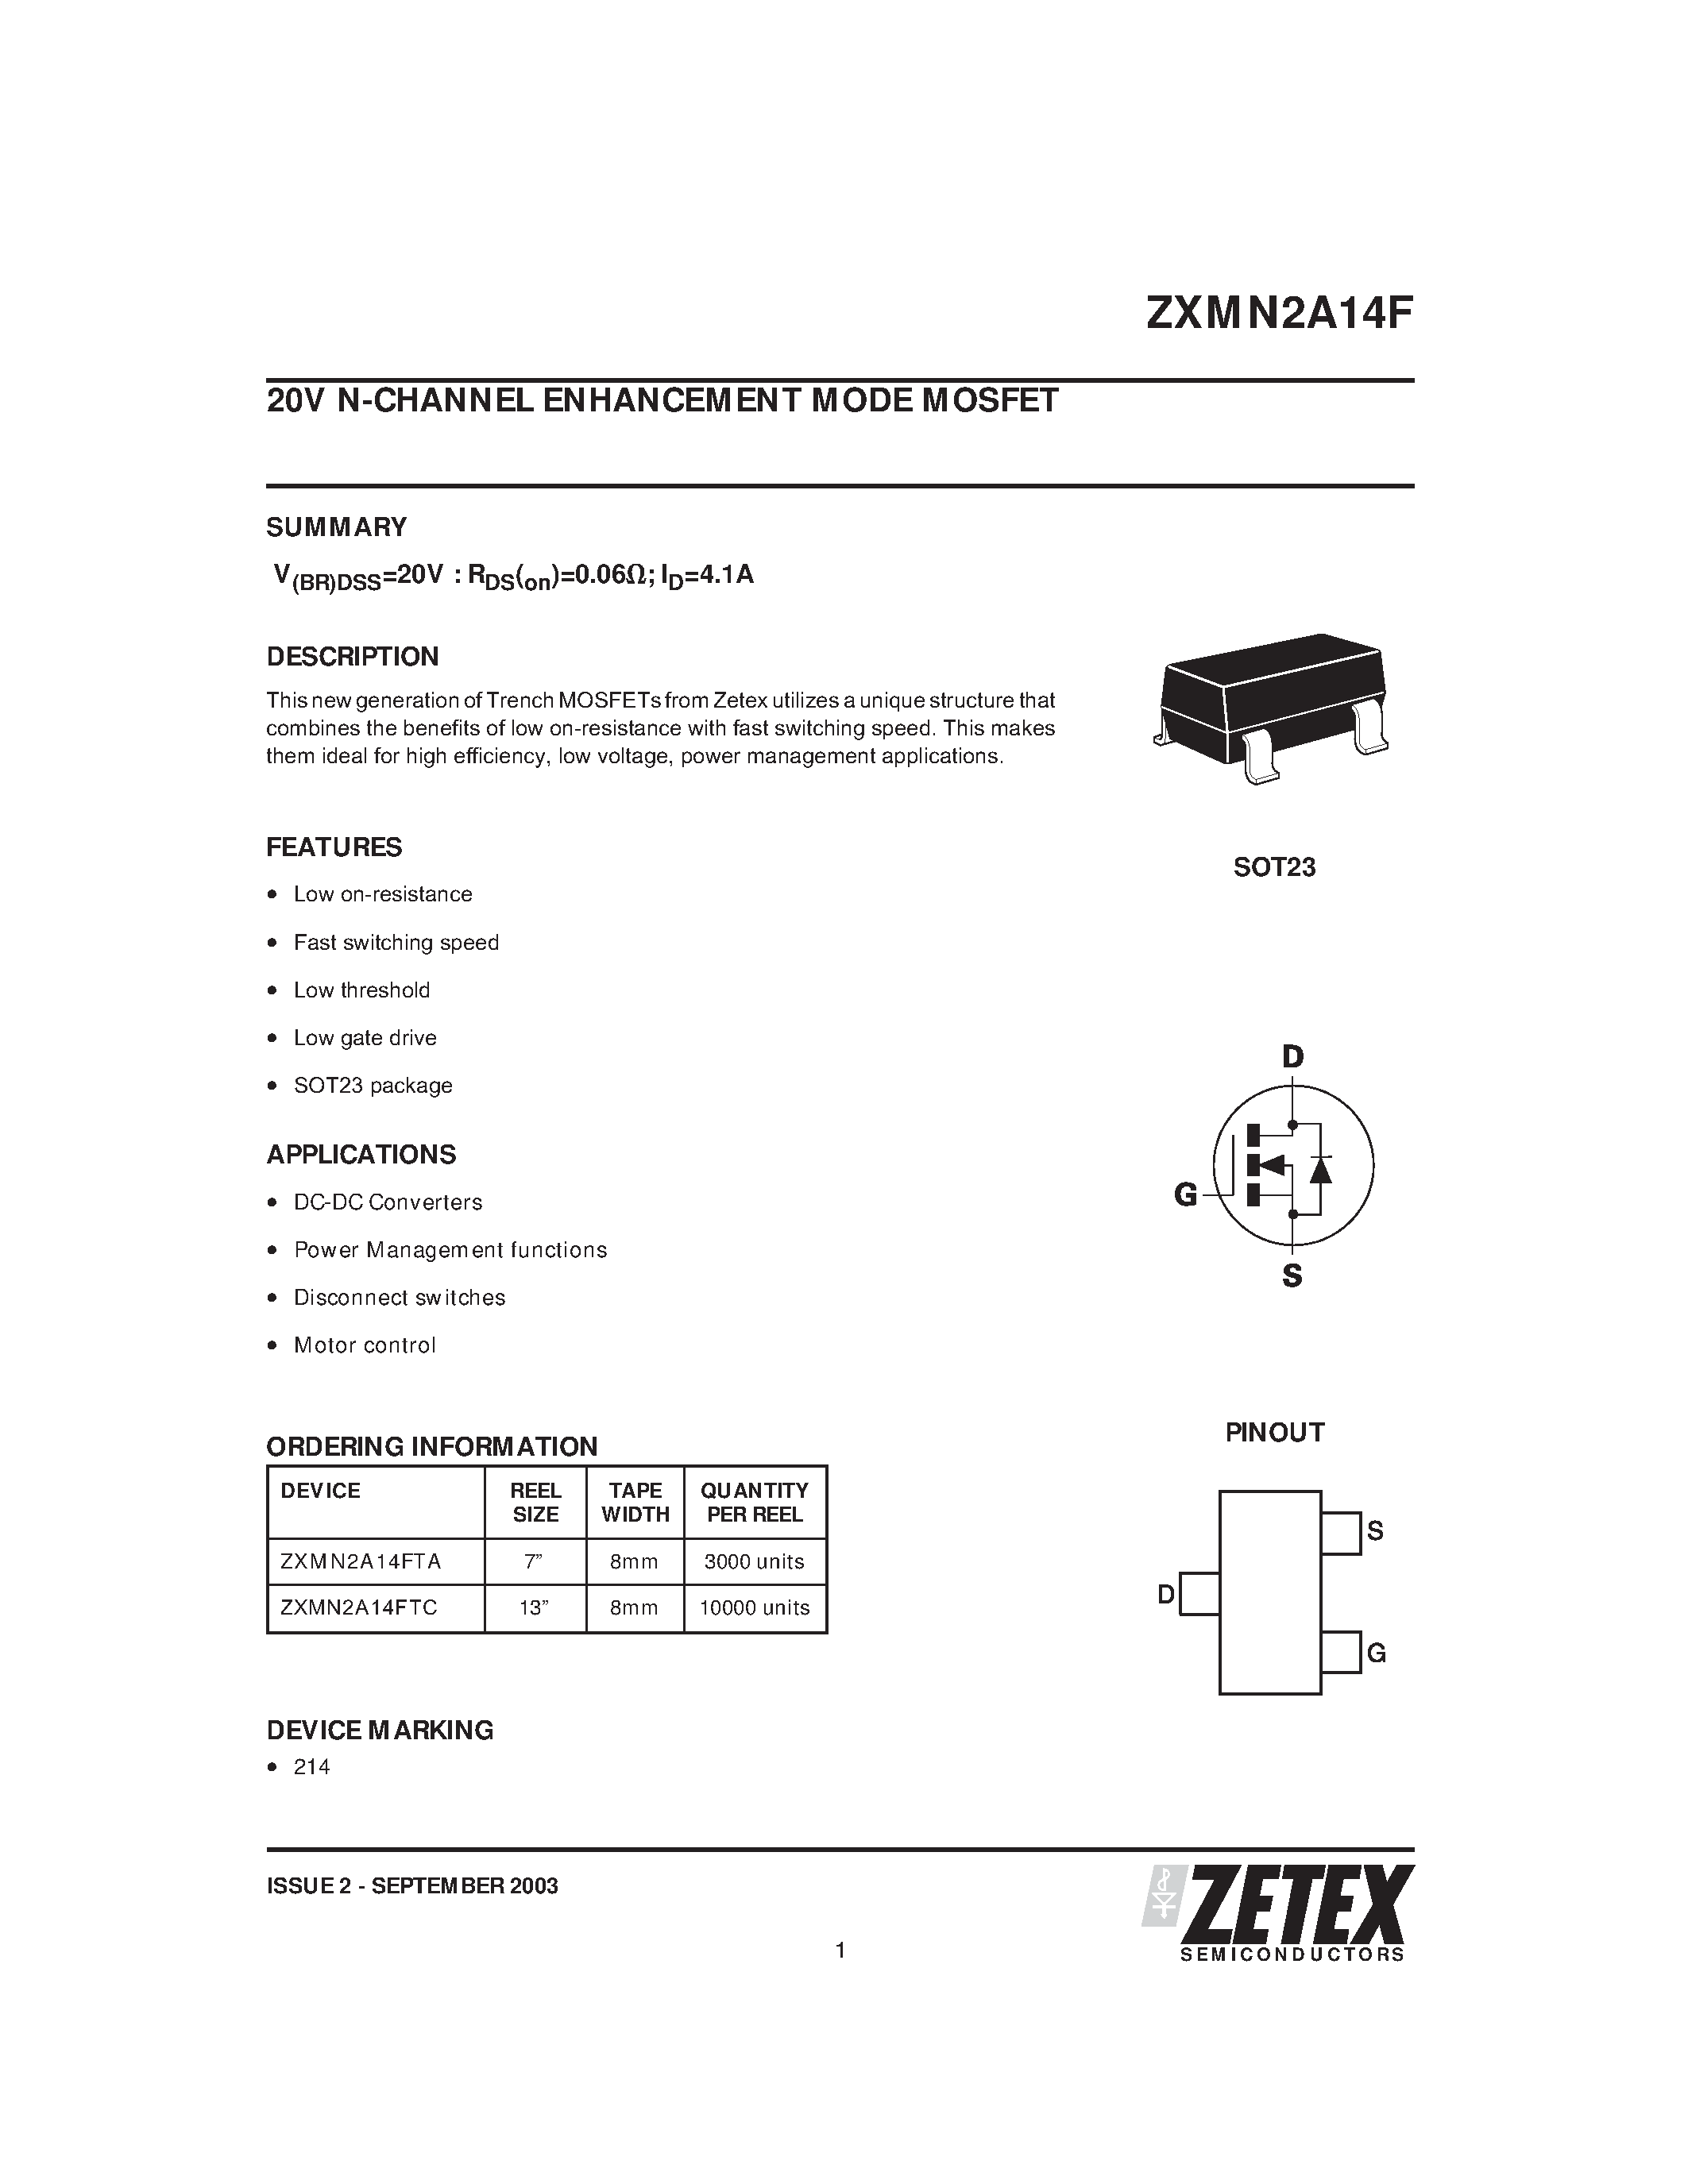 Datasheet ZXMN2A14F - 20V N-CHANNEL ENHANCEMENT MODE MOSFET page 1